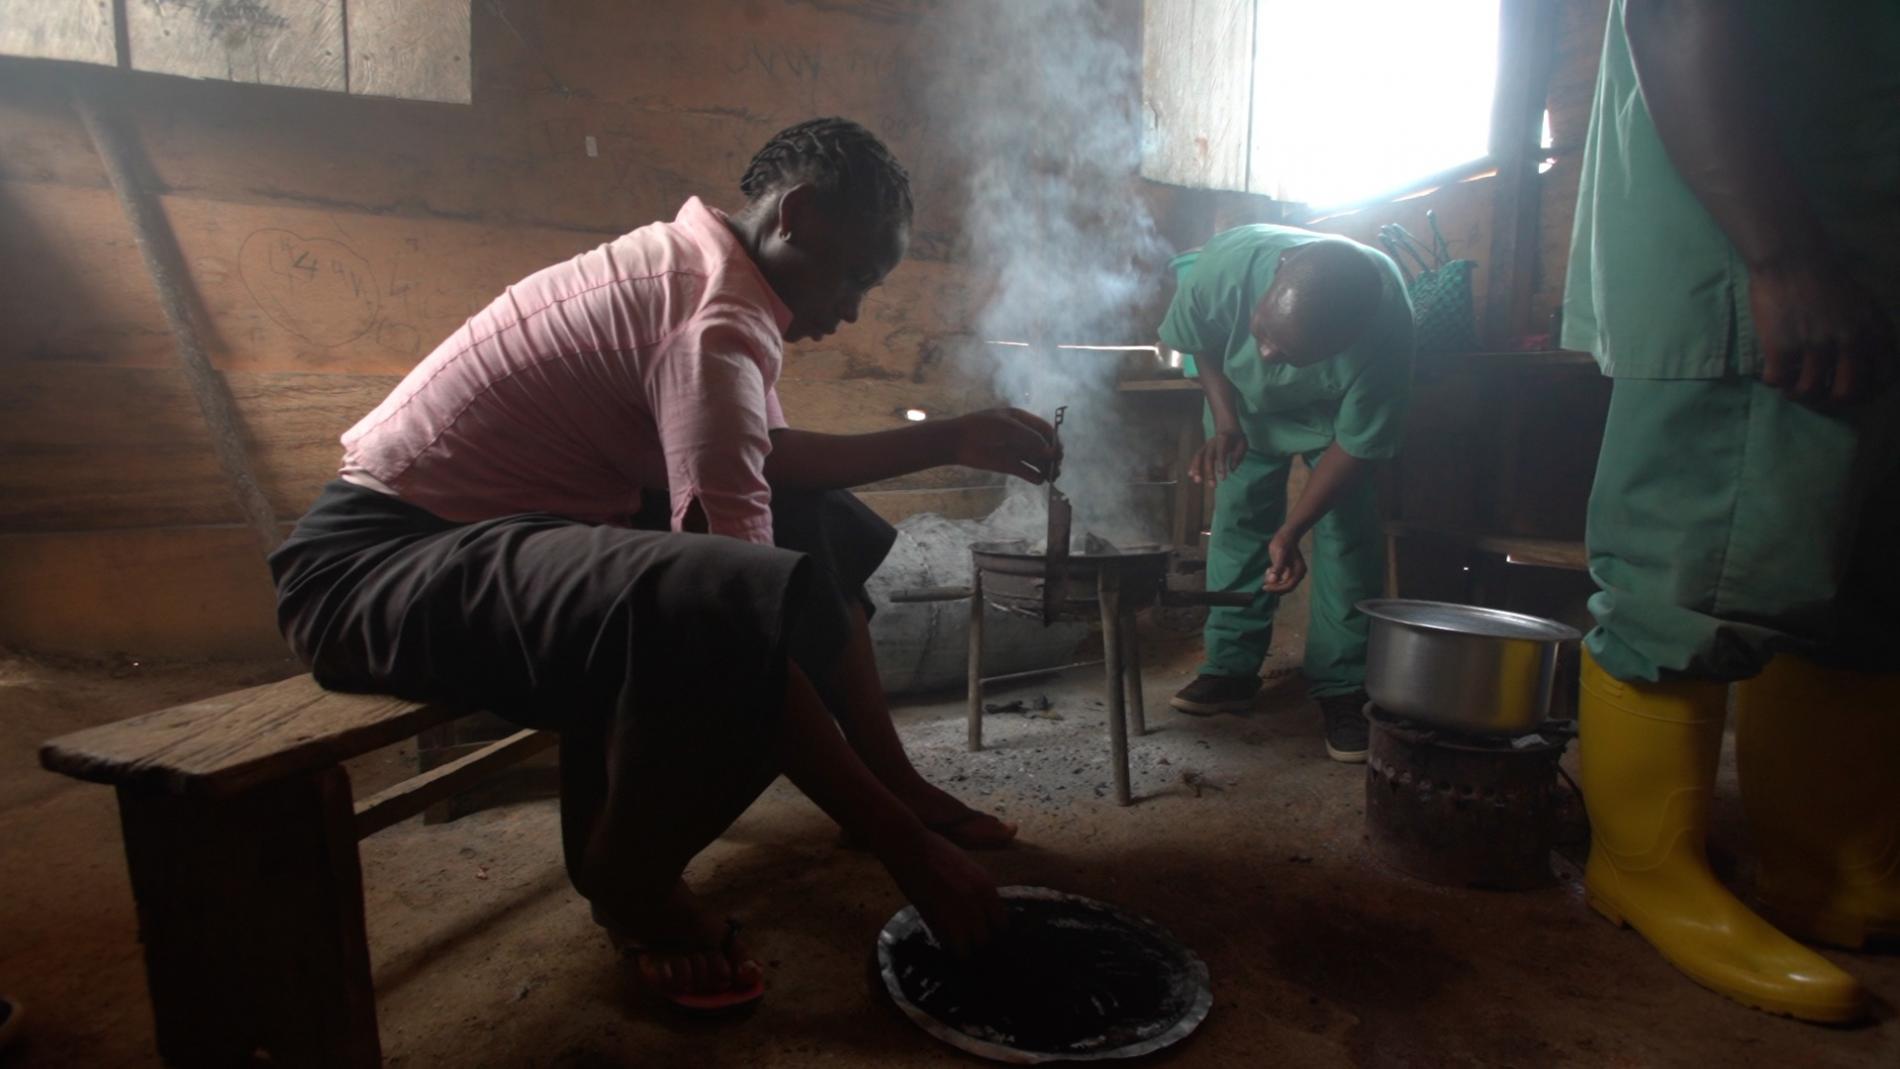 How traditional healers became allies in Ebola response